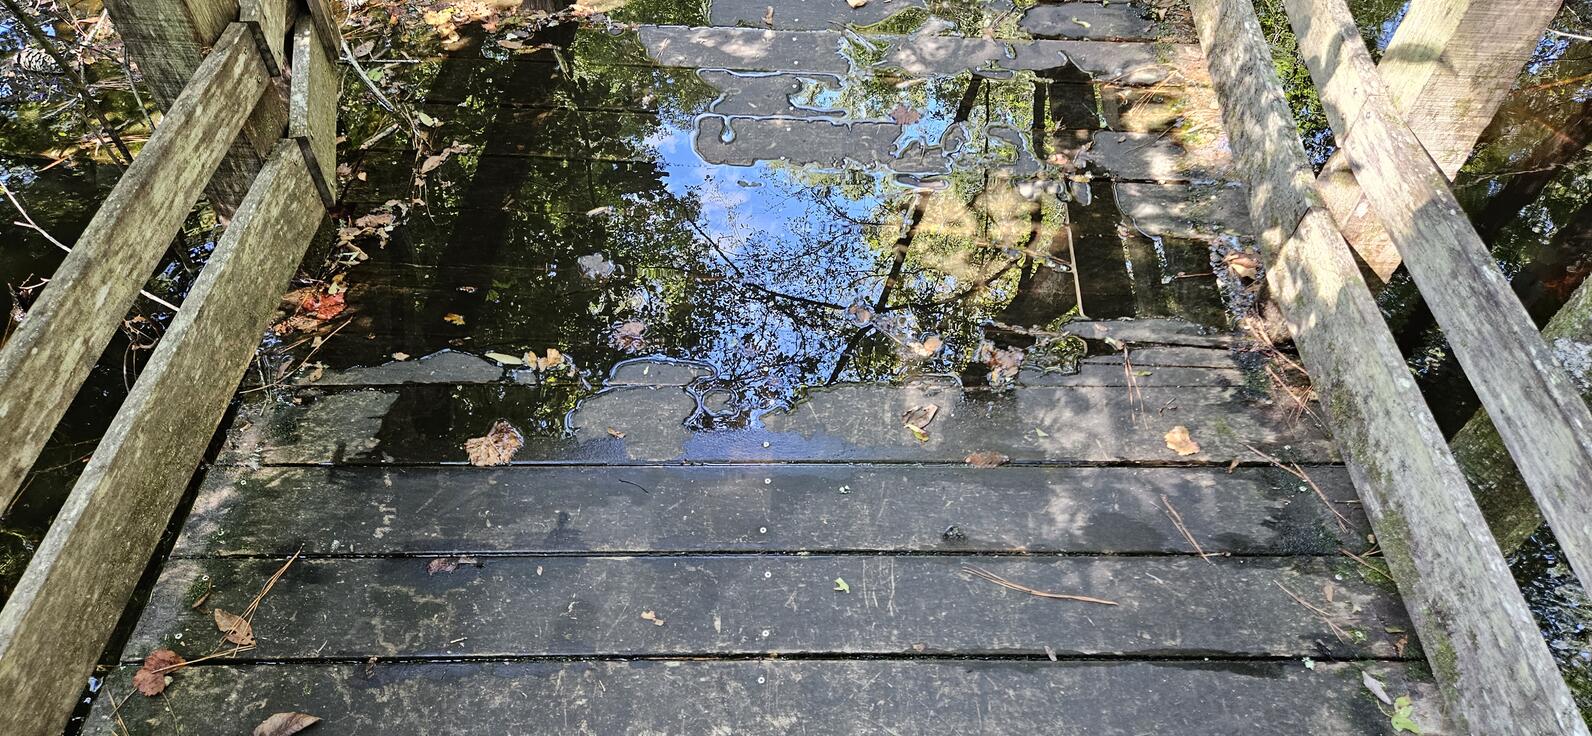 A puddle of water is on the boardwalk's deck, slowly receding as the water level lowers millimeter by millimeter.